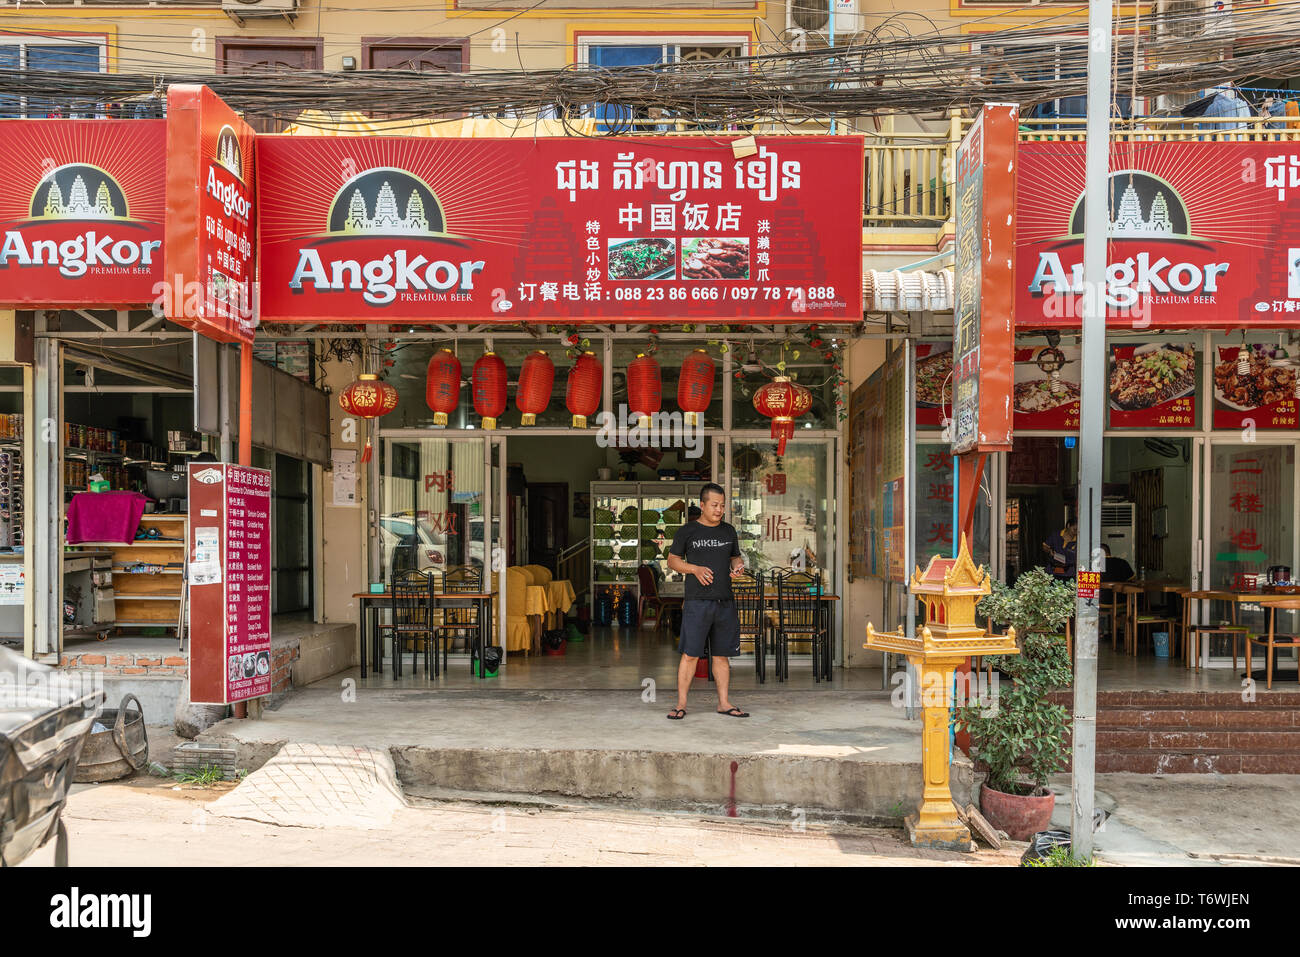 Sihanoukville, Cambodia - March 15, 2019: White on red large advertisement boards for Angkor beer on top op ground level of restaurants and retail sto Stock Photo